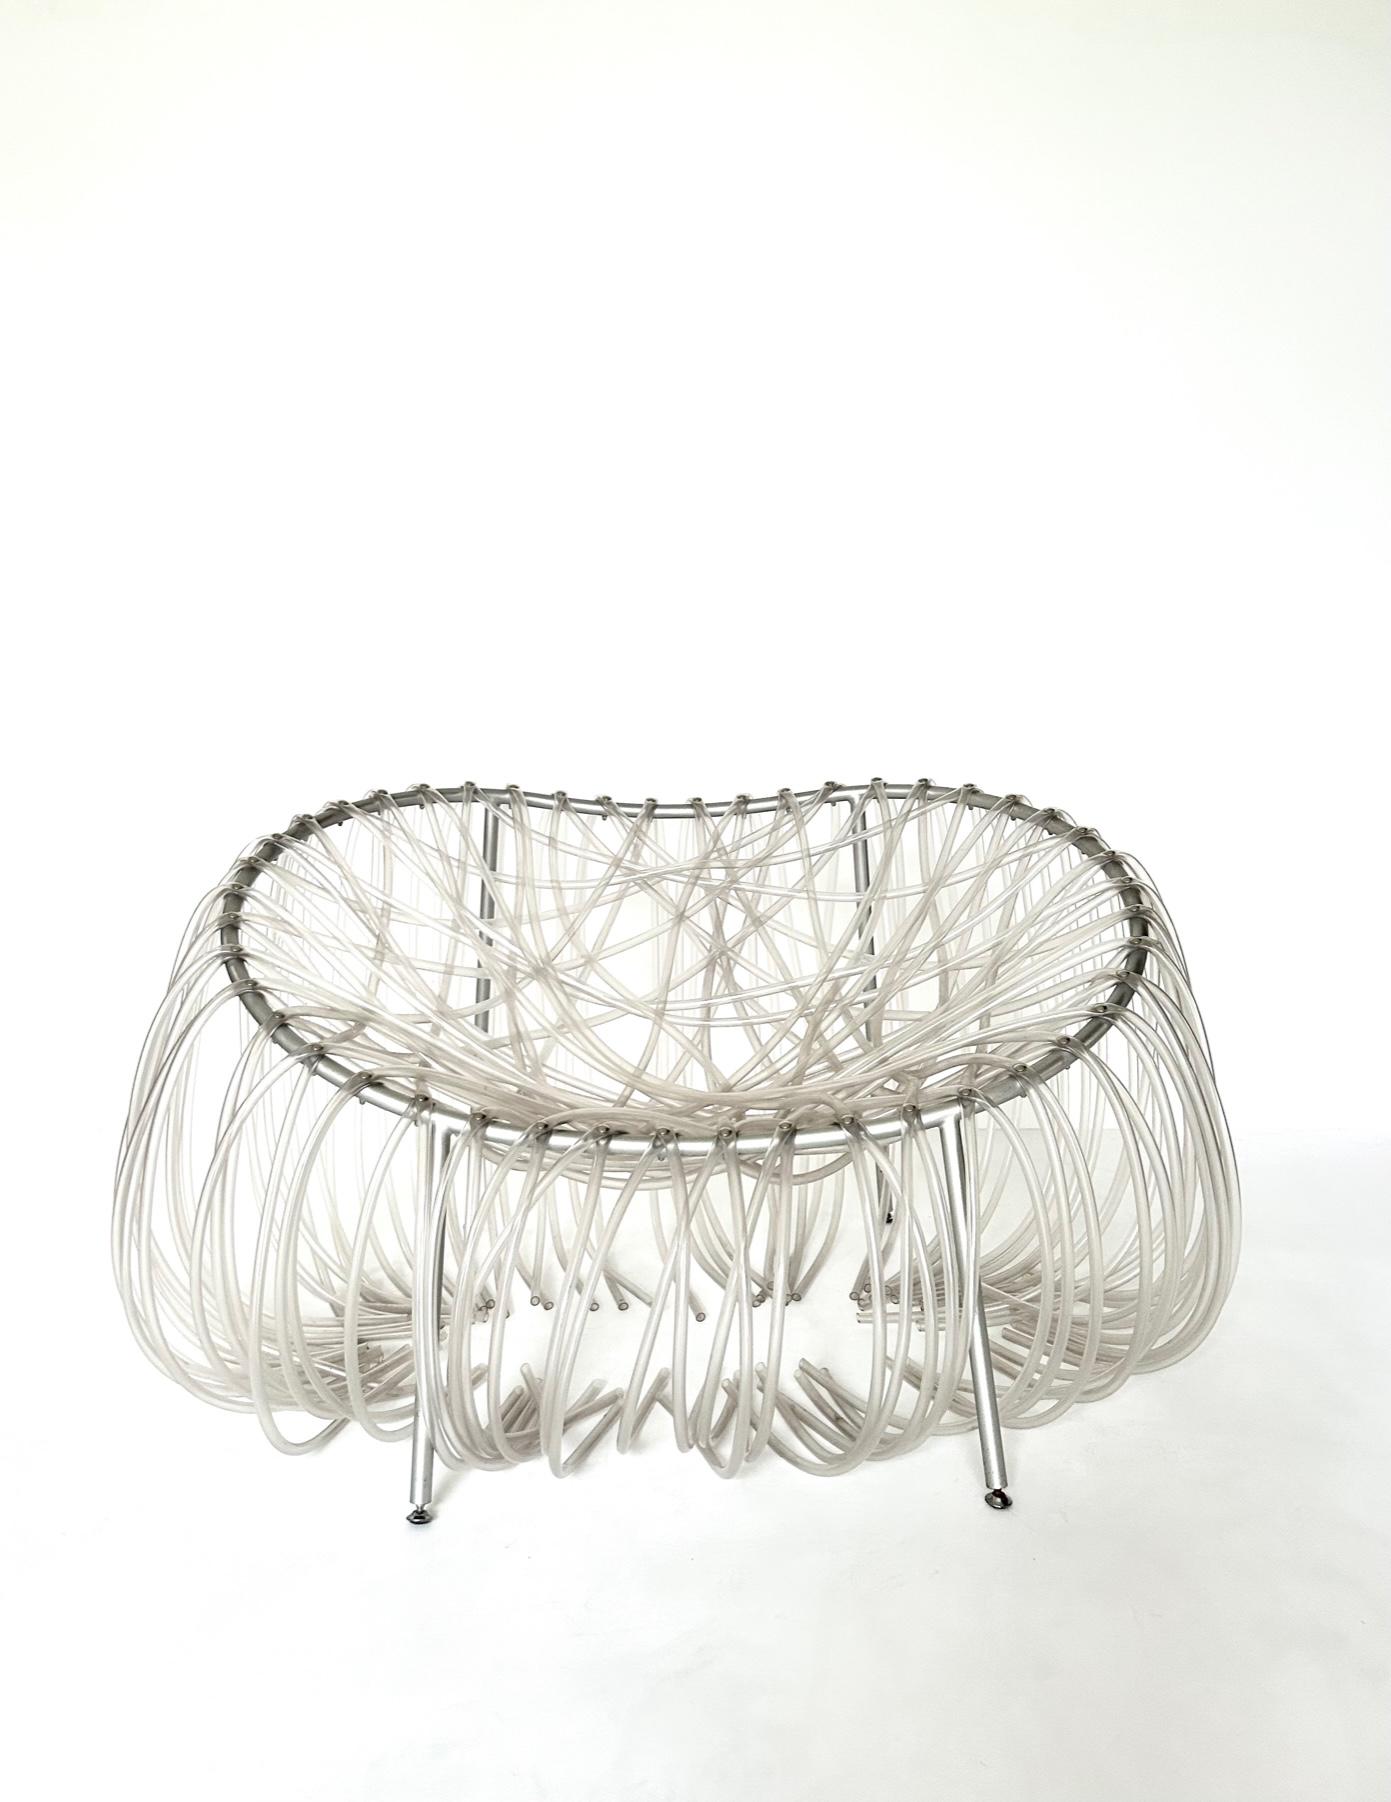 Contemporary Anemone armchair, Campana brothers, Edra, 2001 For Sale